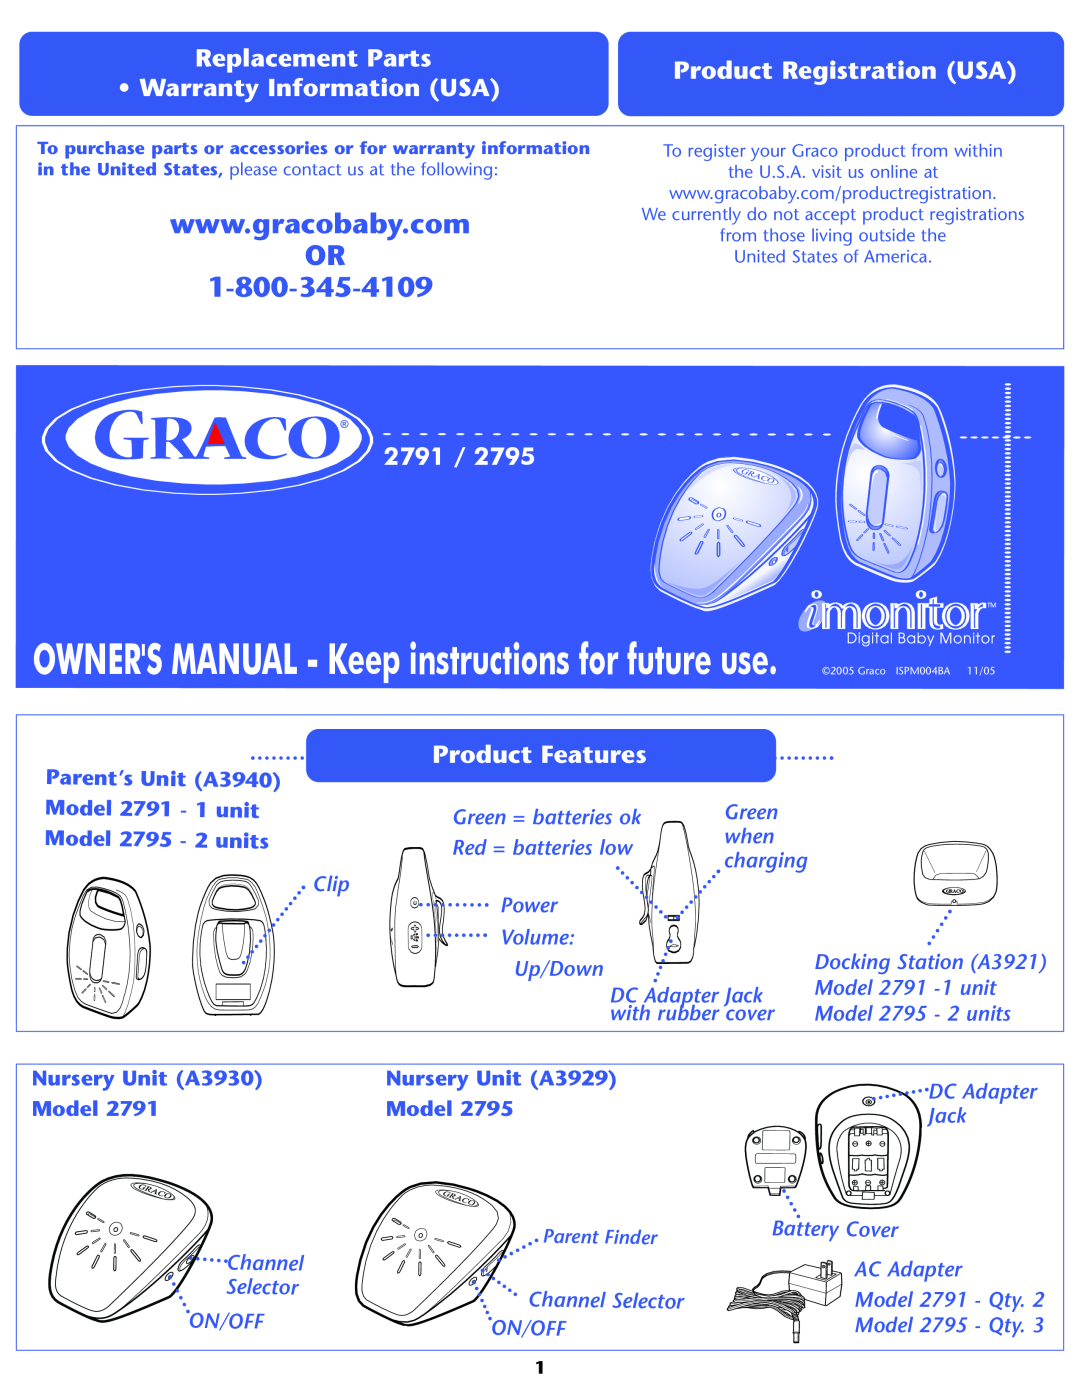 Graco 2791 owner manual Replacement Parts, Product Registration USA, Warranty Information USA, Product Features, Model 